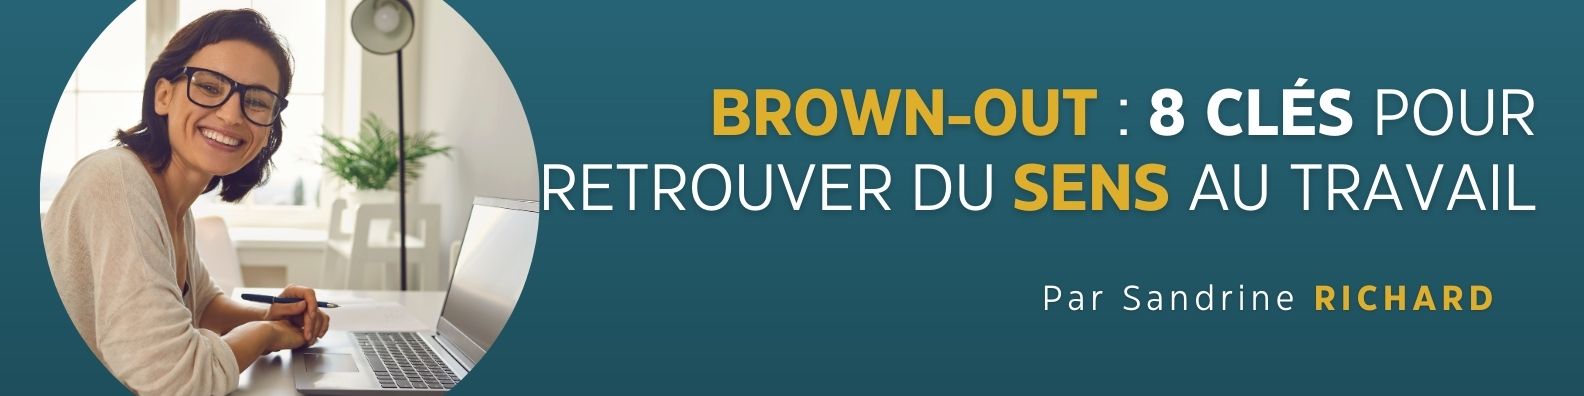 Le brown-out - blog